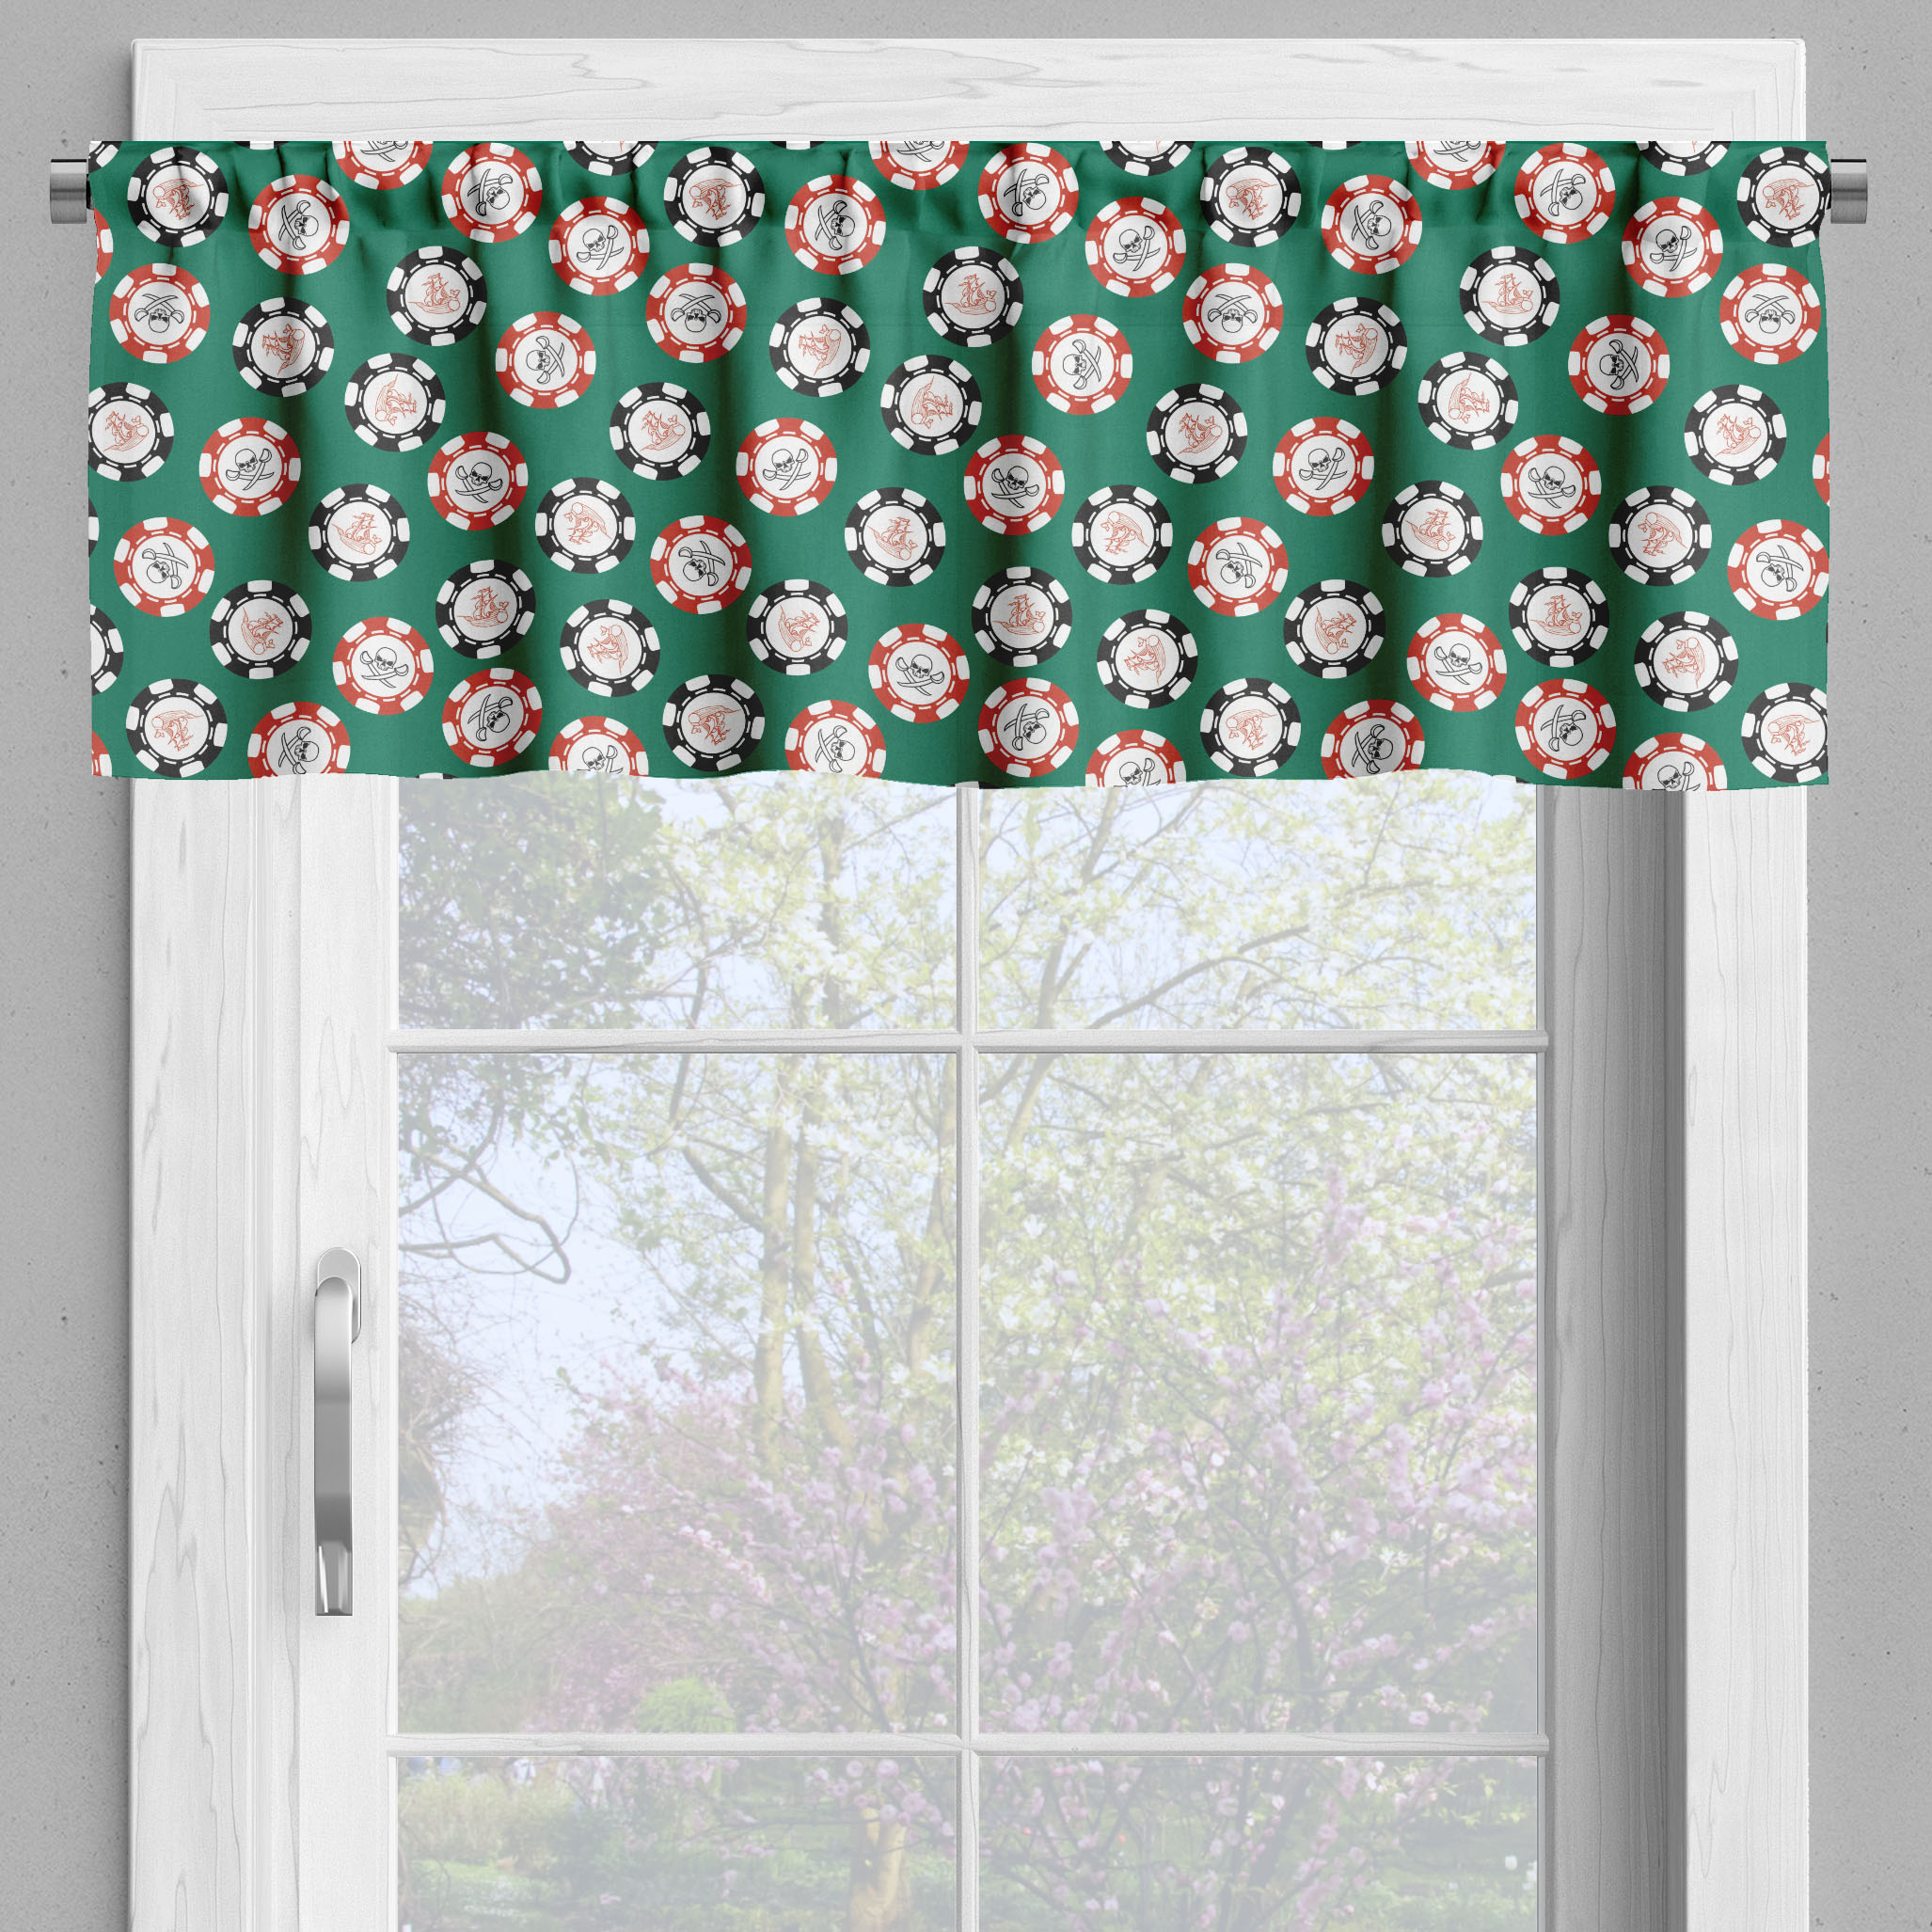 Ambesonne Green Black Window Valance, Chips Pirate, 54" X 12", Jade Green Red - image 2 of 5